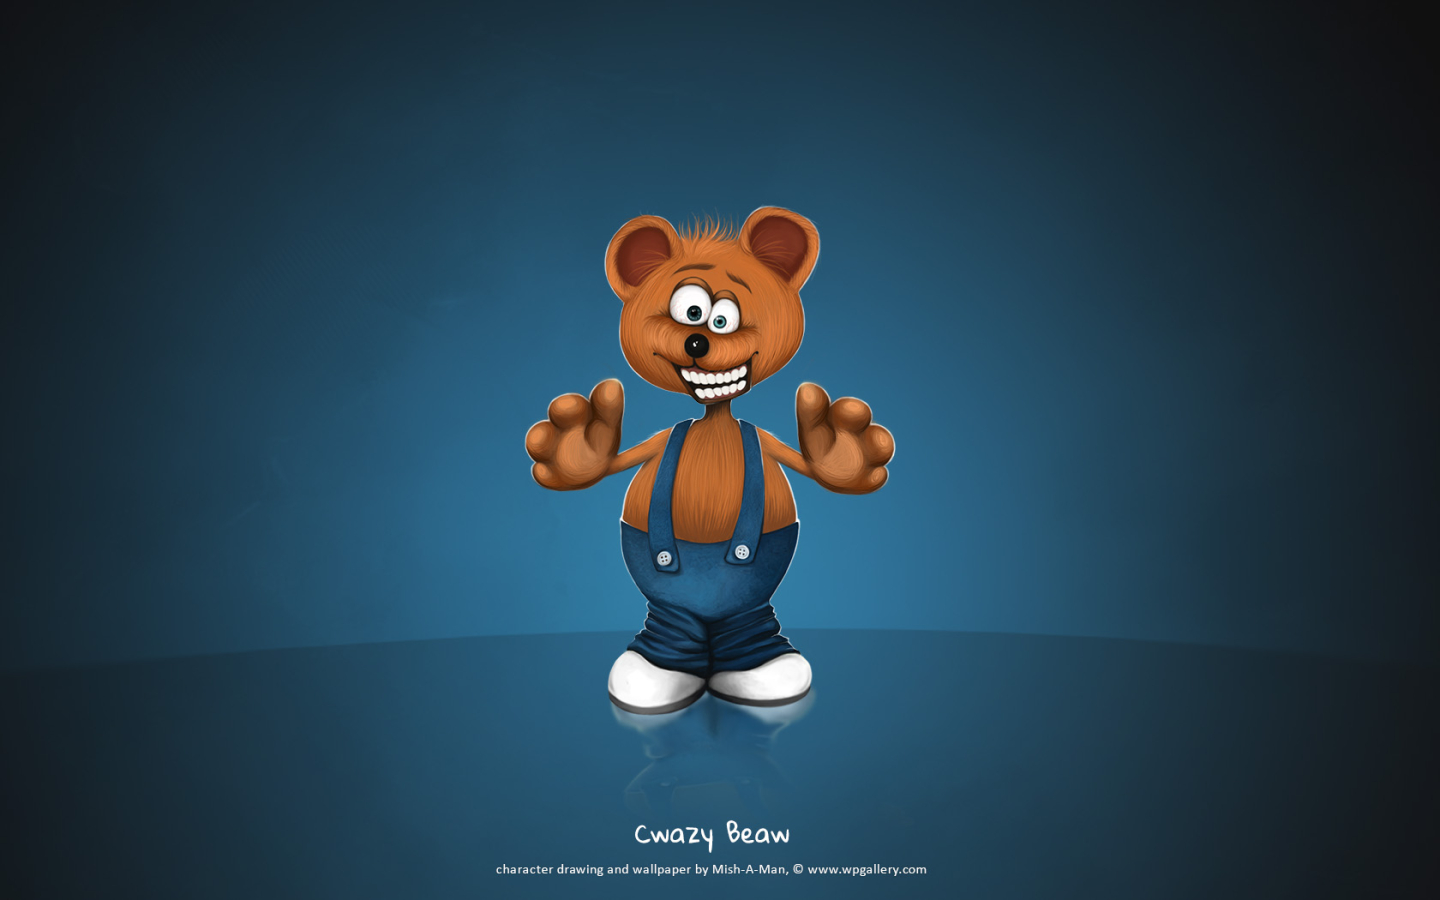 Cwazy Beaw for 1440 x 900 widescreen resolution